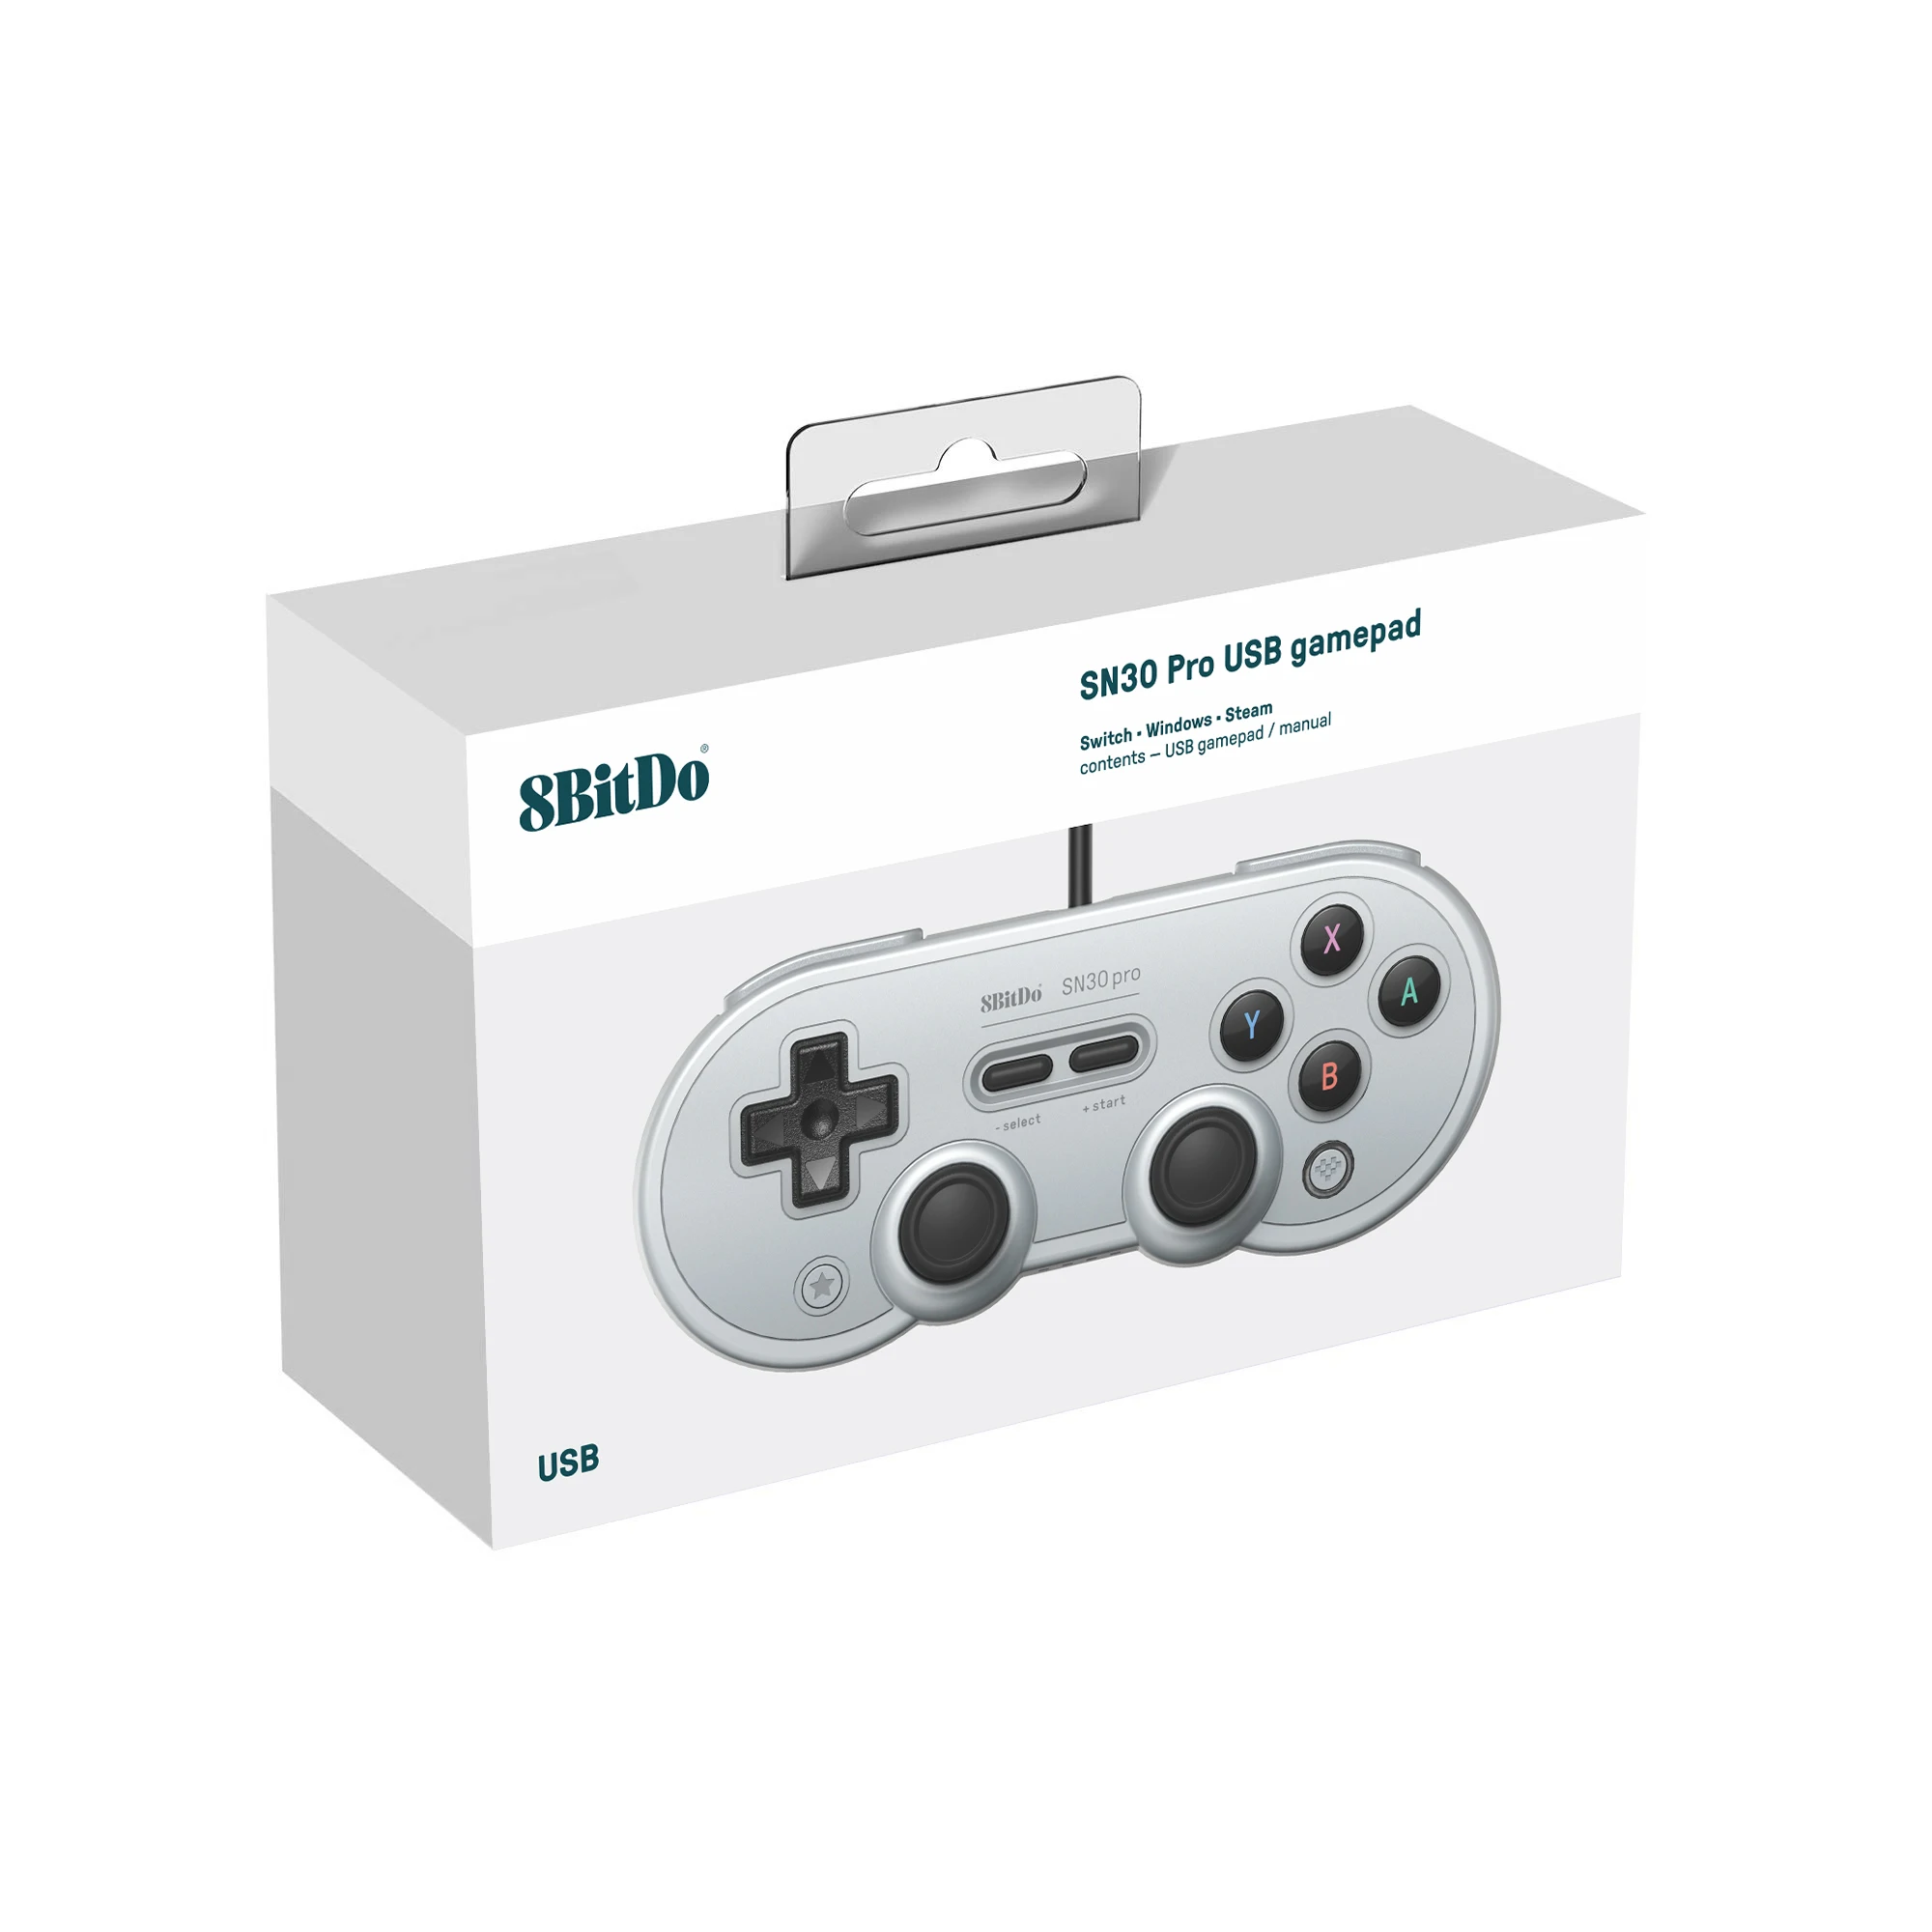 8BitDo SN30 Pro USB Gamepad Joystick Wired Controller with USB Cable for Nintendo Switch Windows Raspberry Pi images - 6